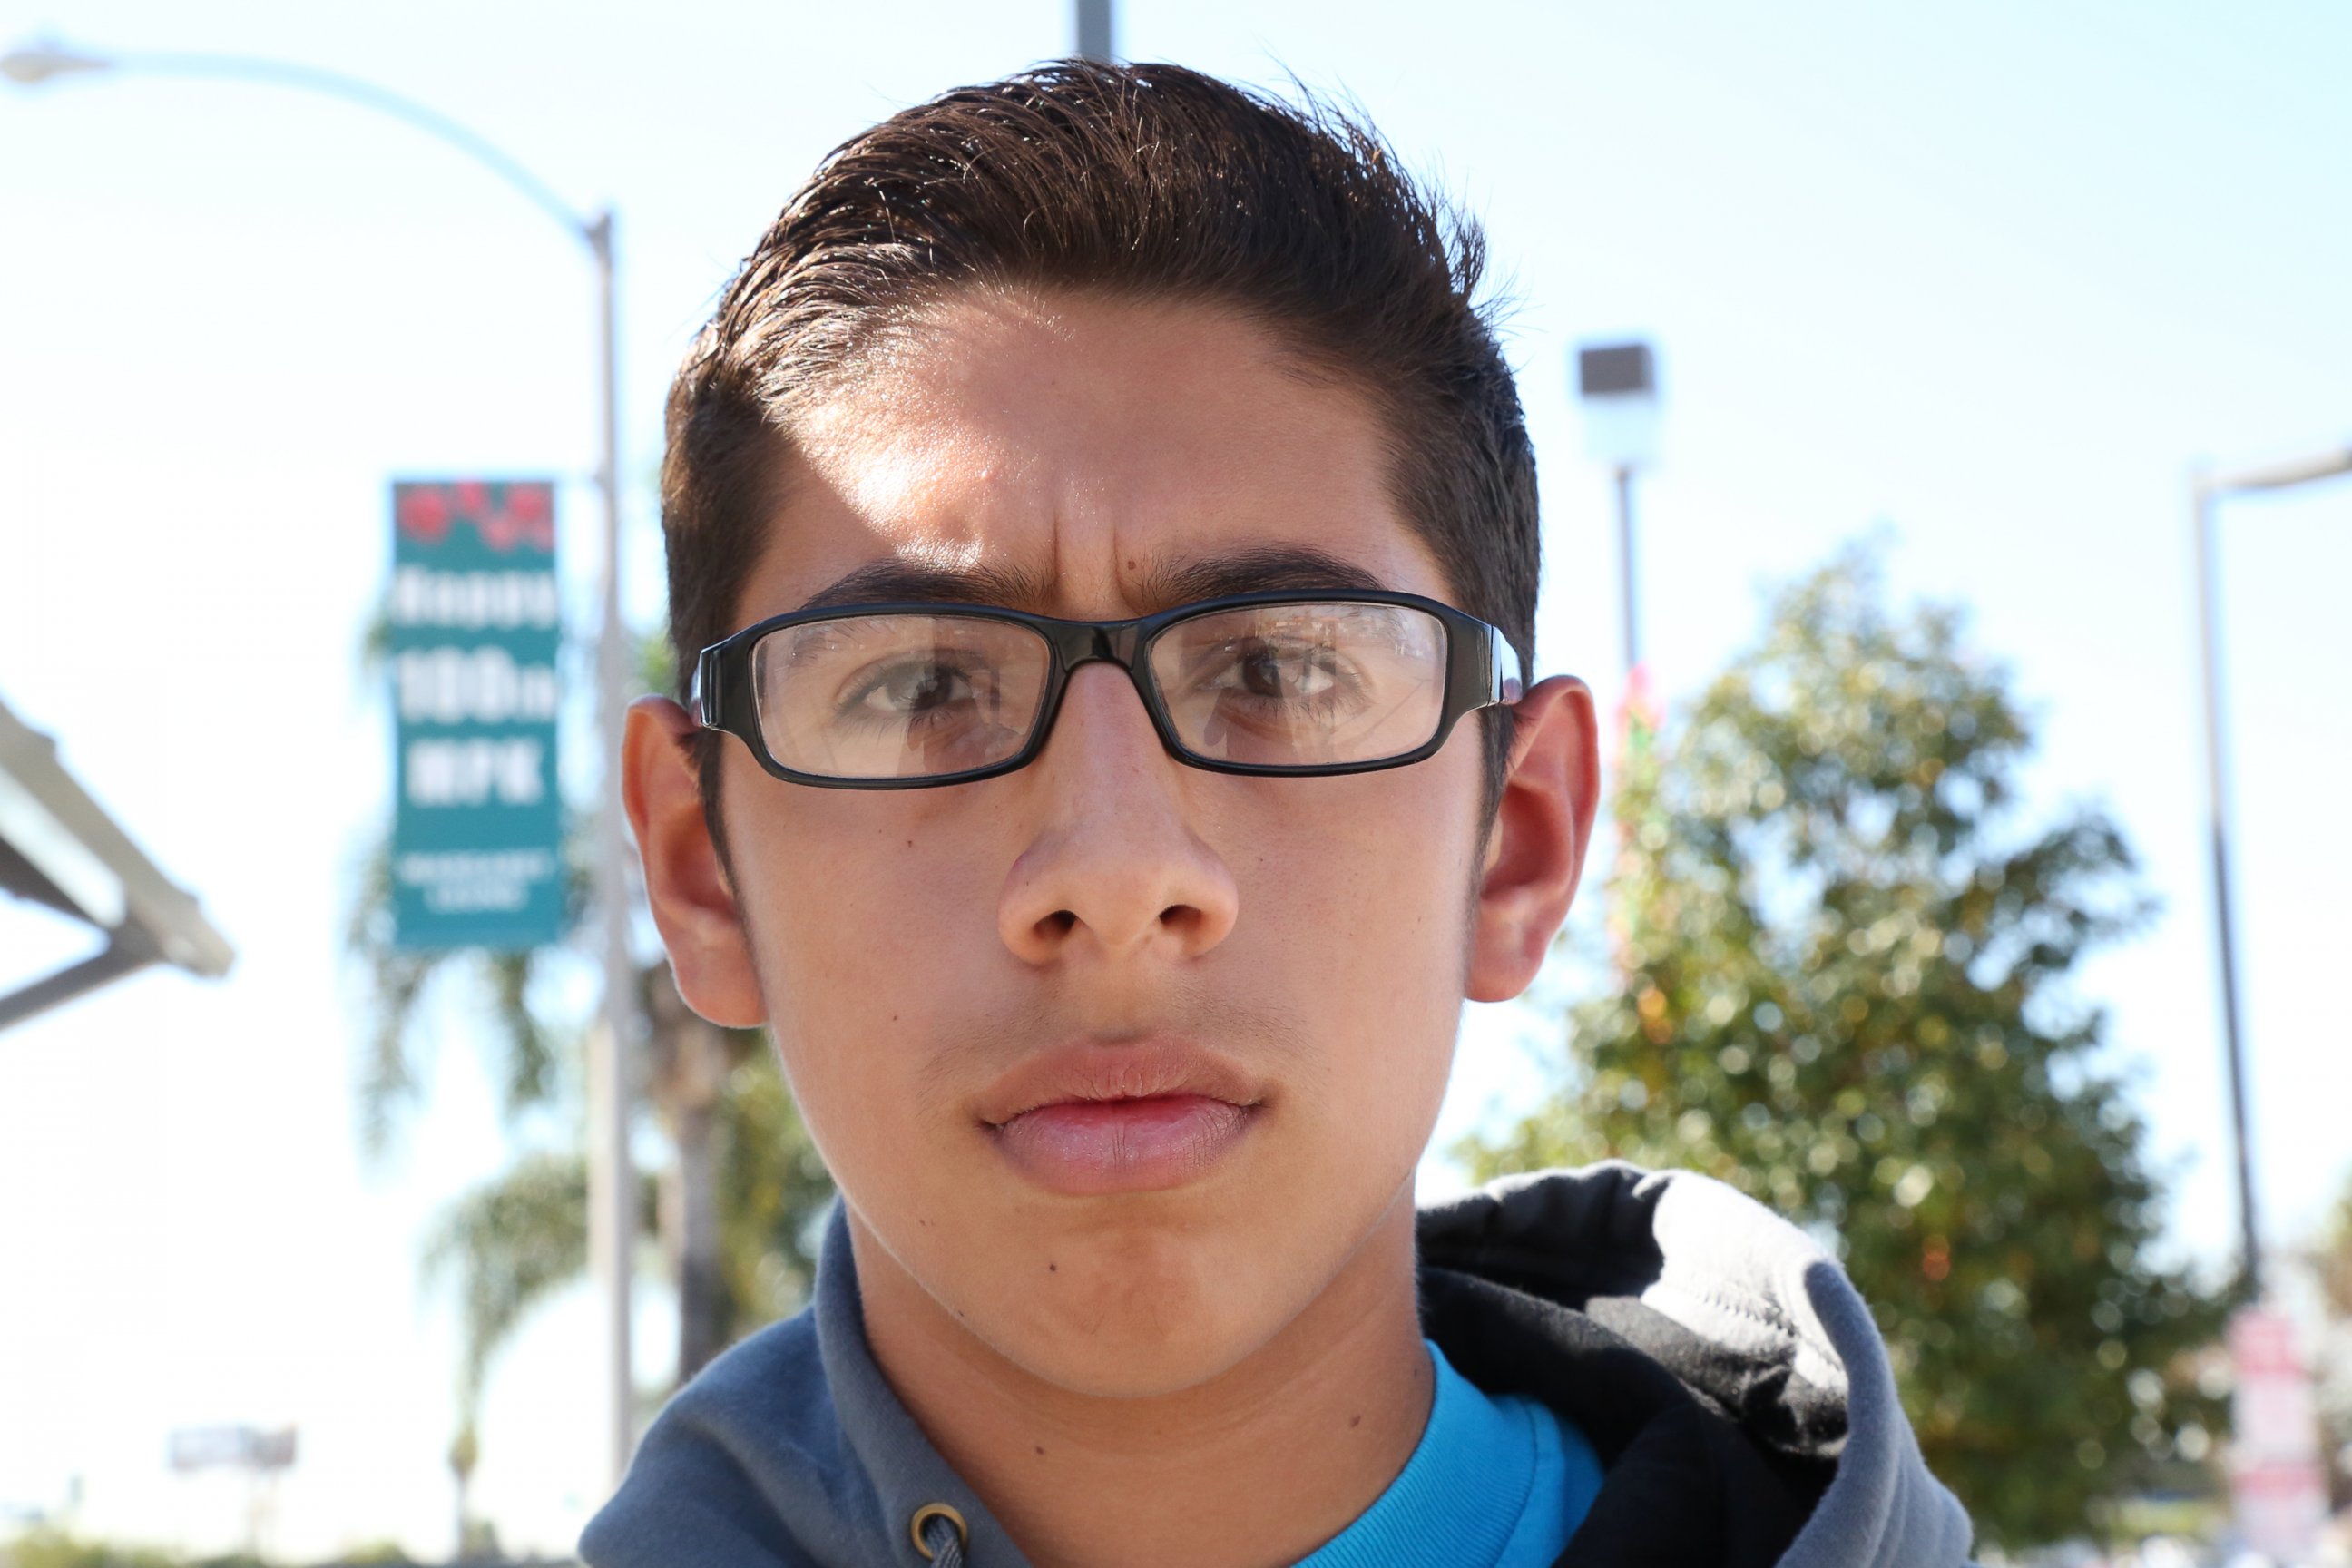 PHOTO: Los Angeles resident Josue, 14, told ABC News he thinks the next four years are going to be difficult because of President-elect Donald Trump.